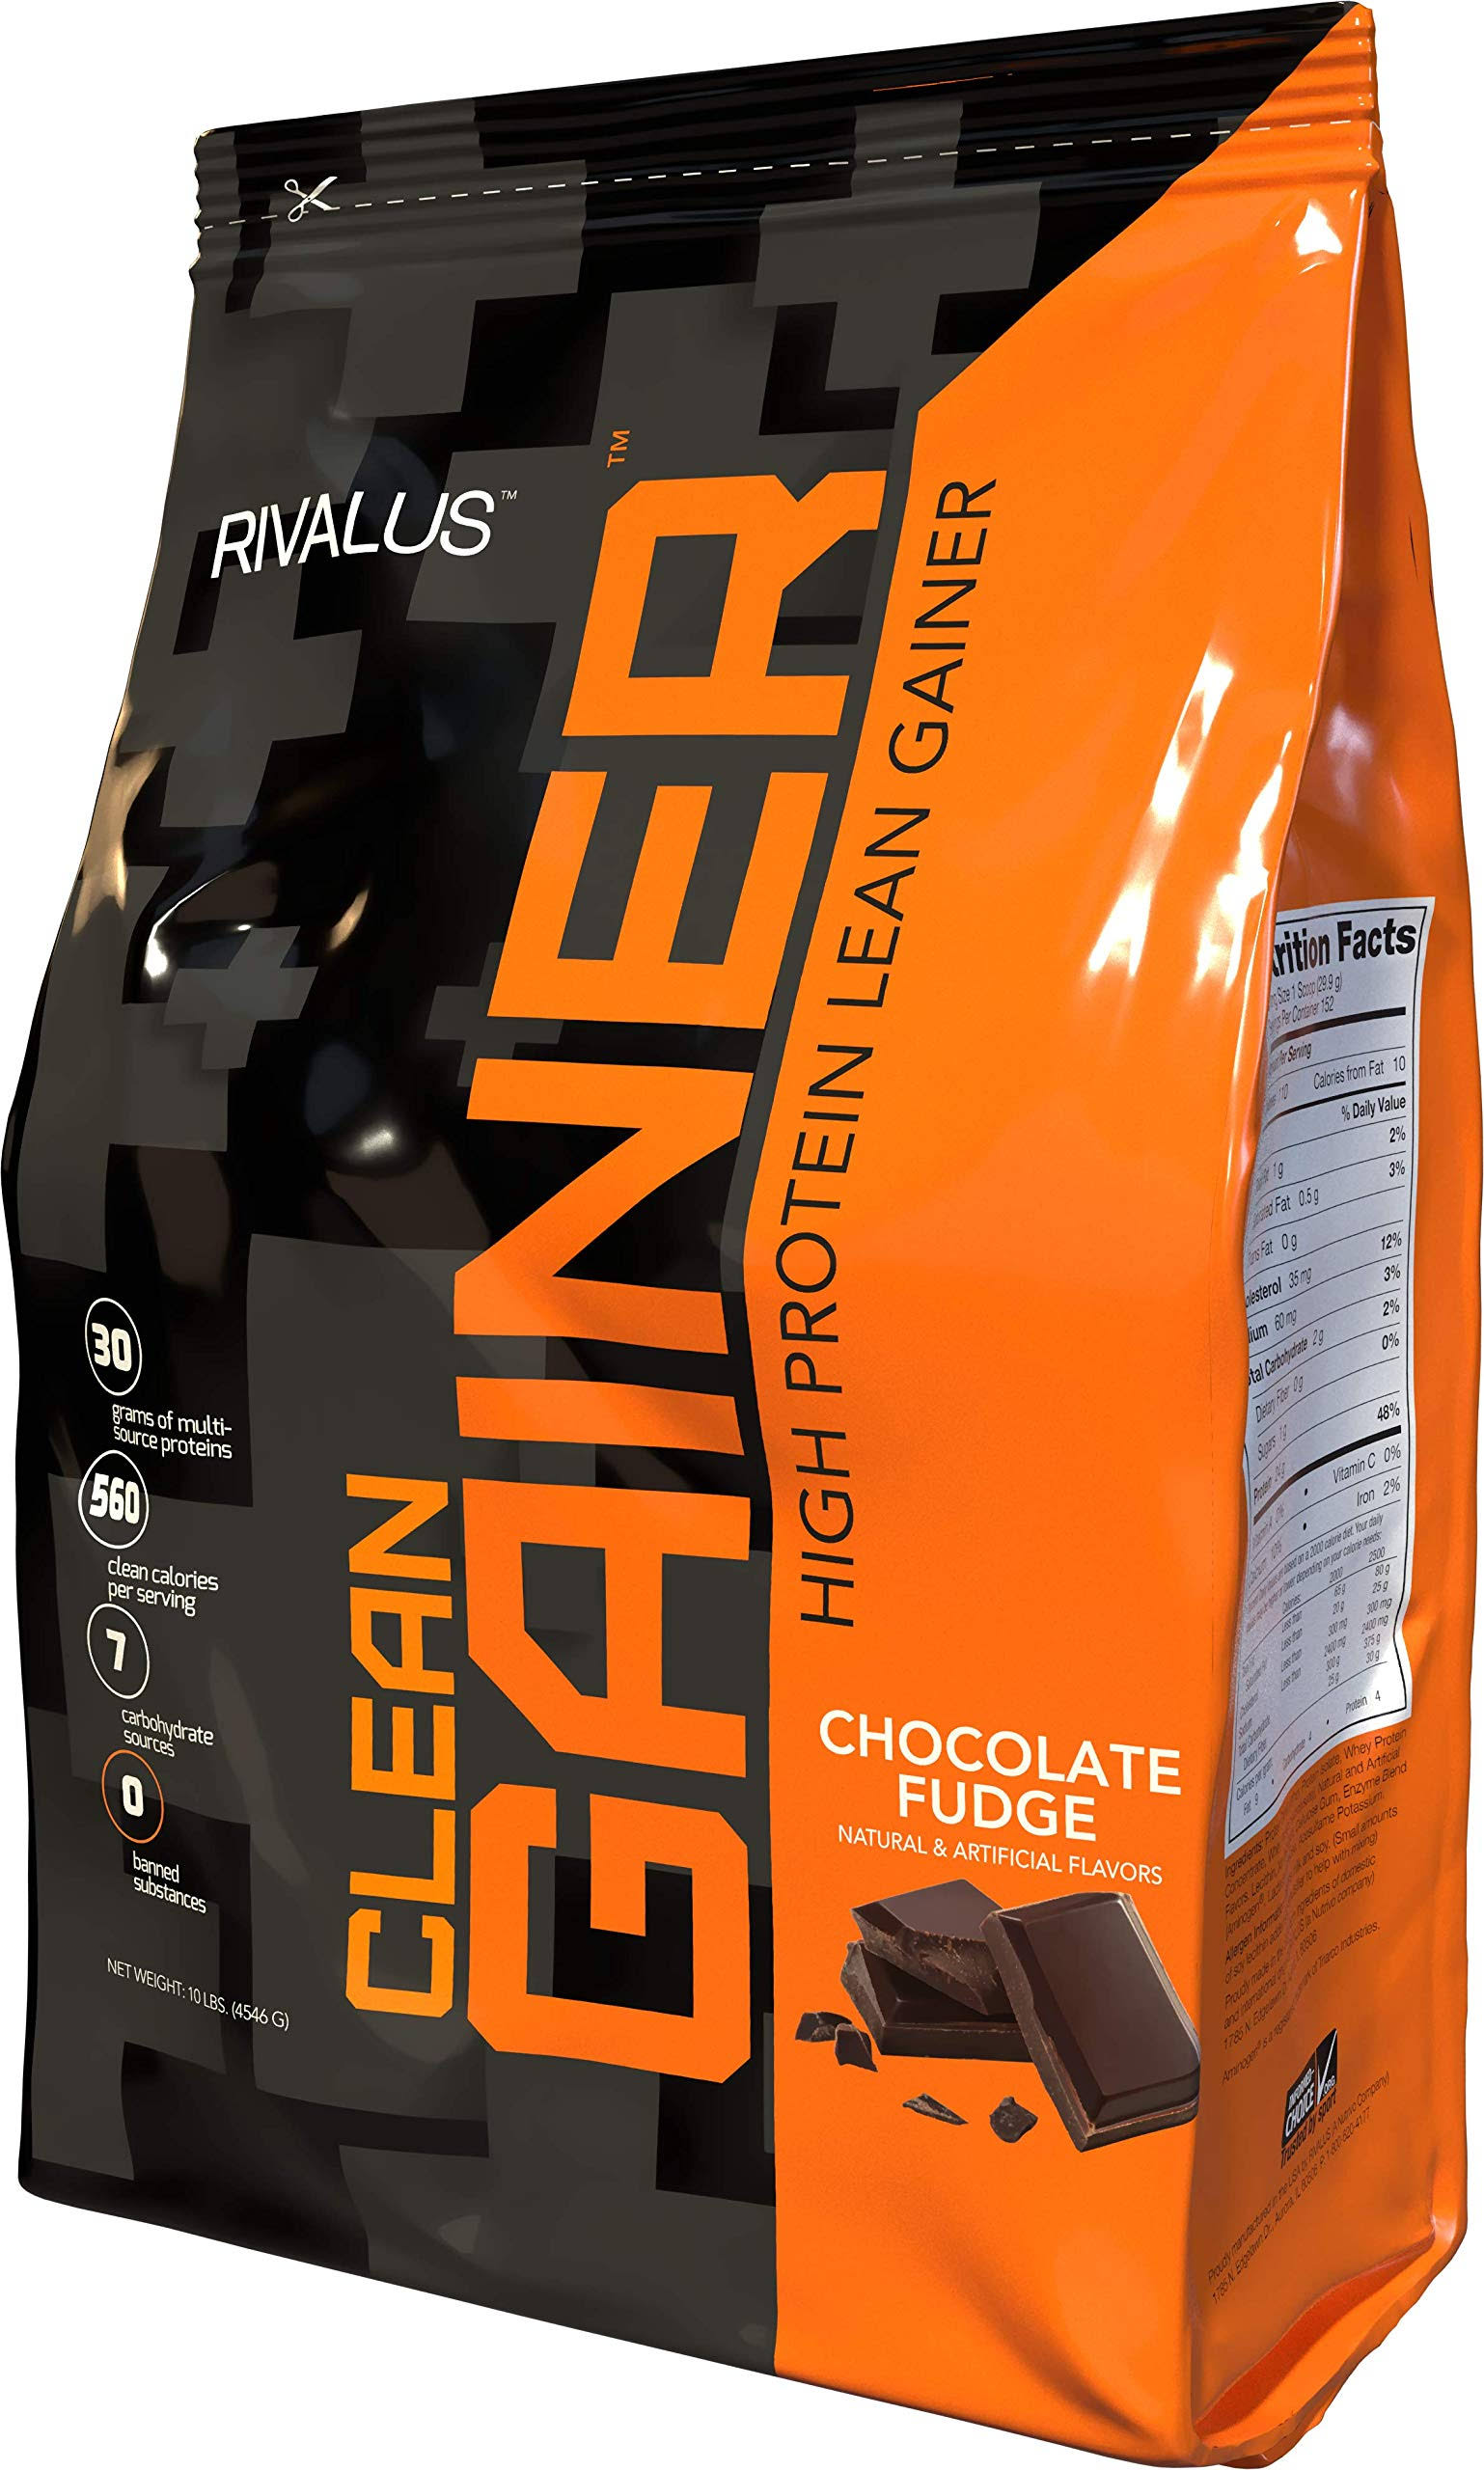 Rivalus Clean Gainer – Chocolate Fudge 10lb - Delicious Lean Mass Gainer with Premium Dairy Proteins, Complex Carbohydrates, and Quality Lipids, No